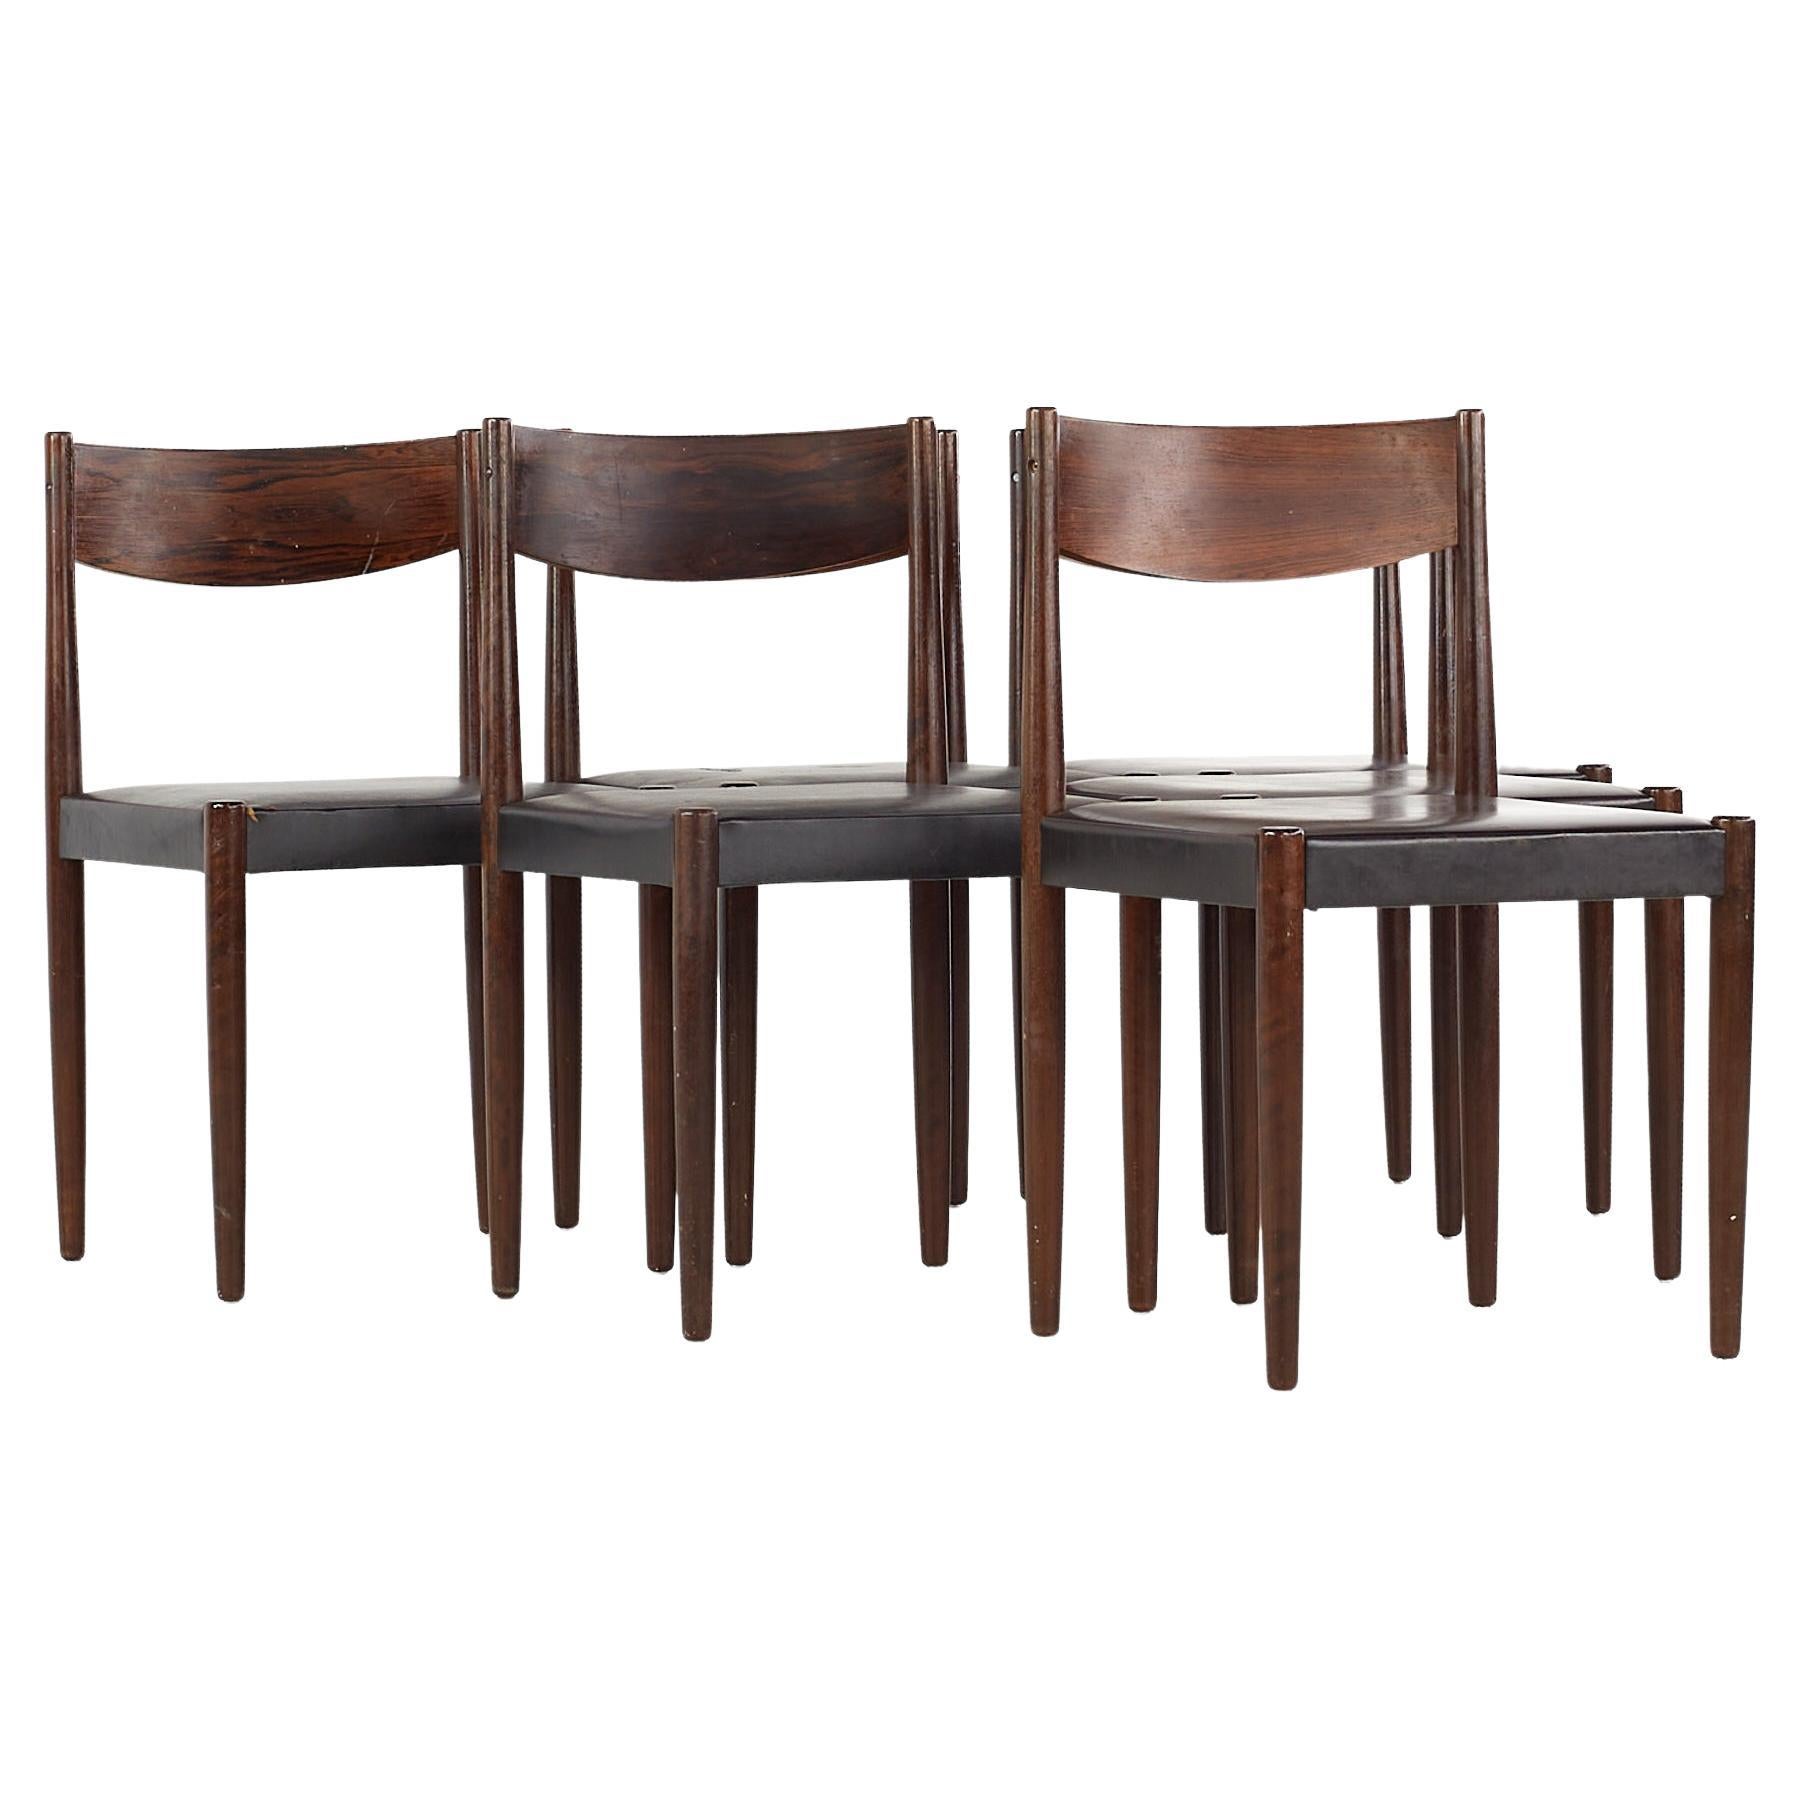 Niels Moller Style Mid-Century Danish Rosewood Dining Chairs, Set of 6